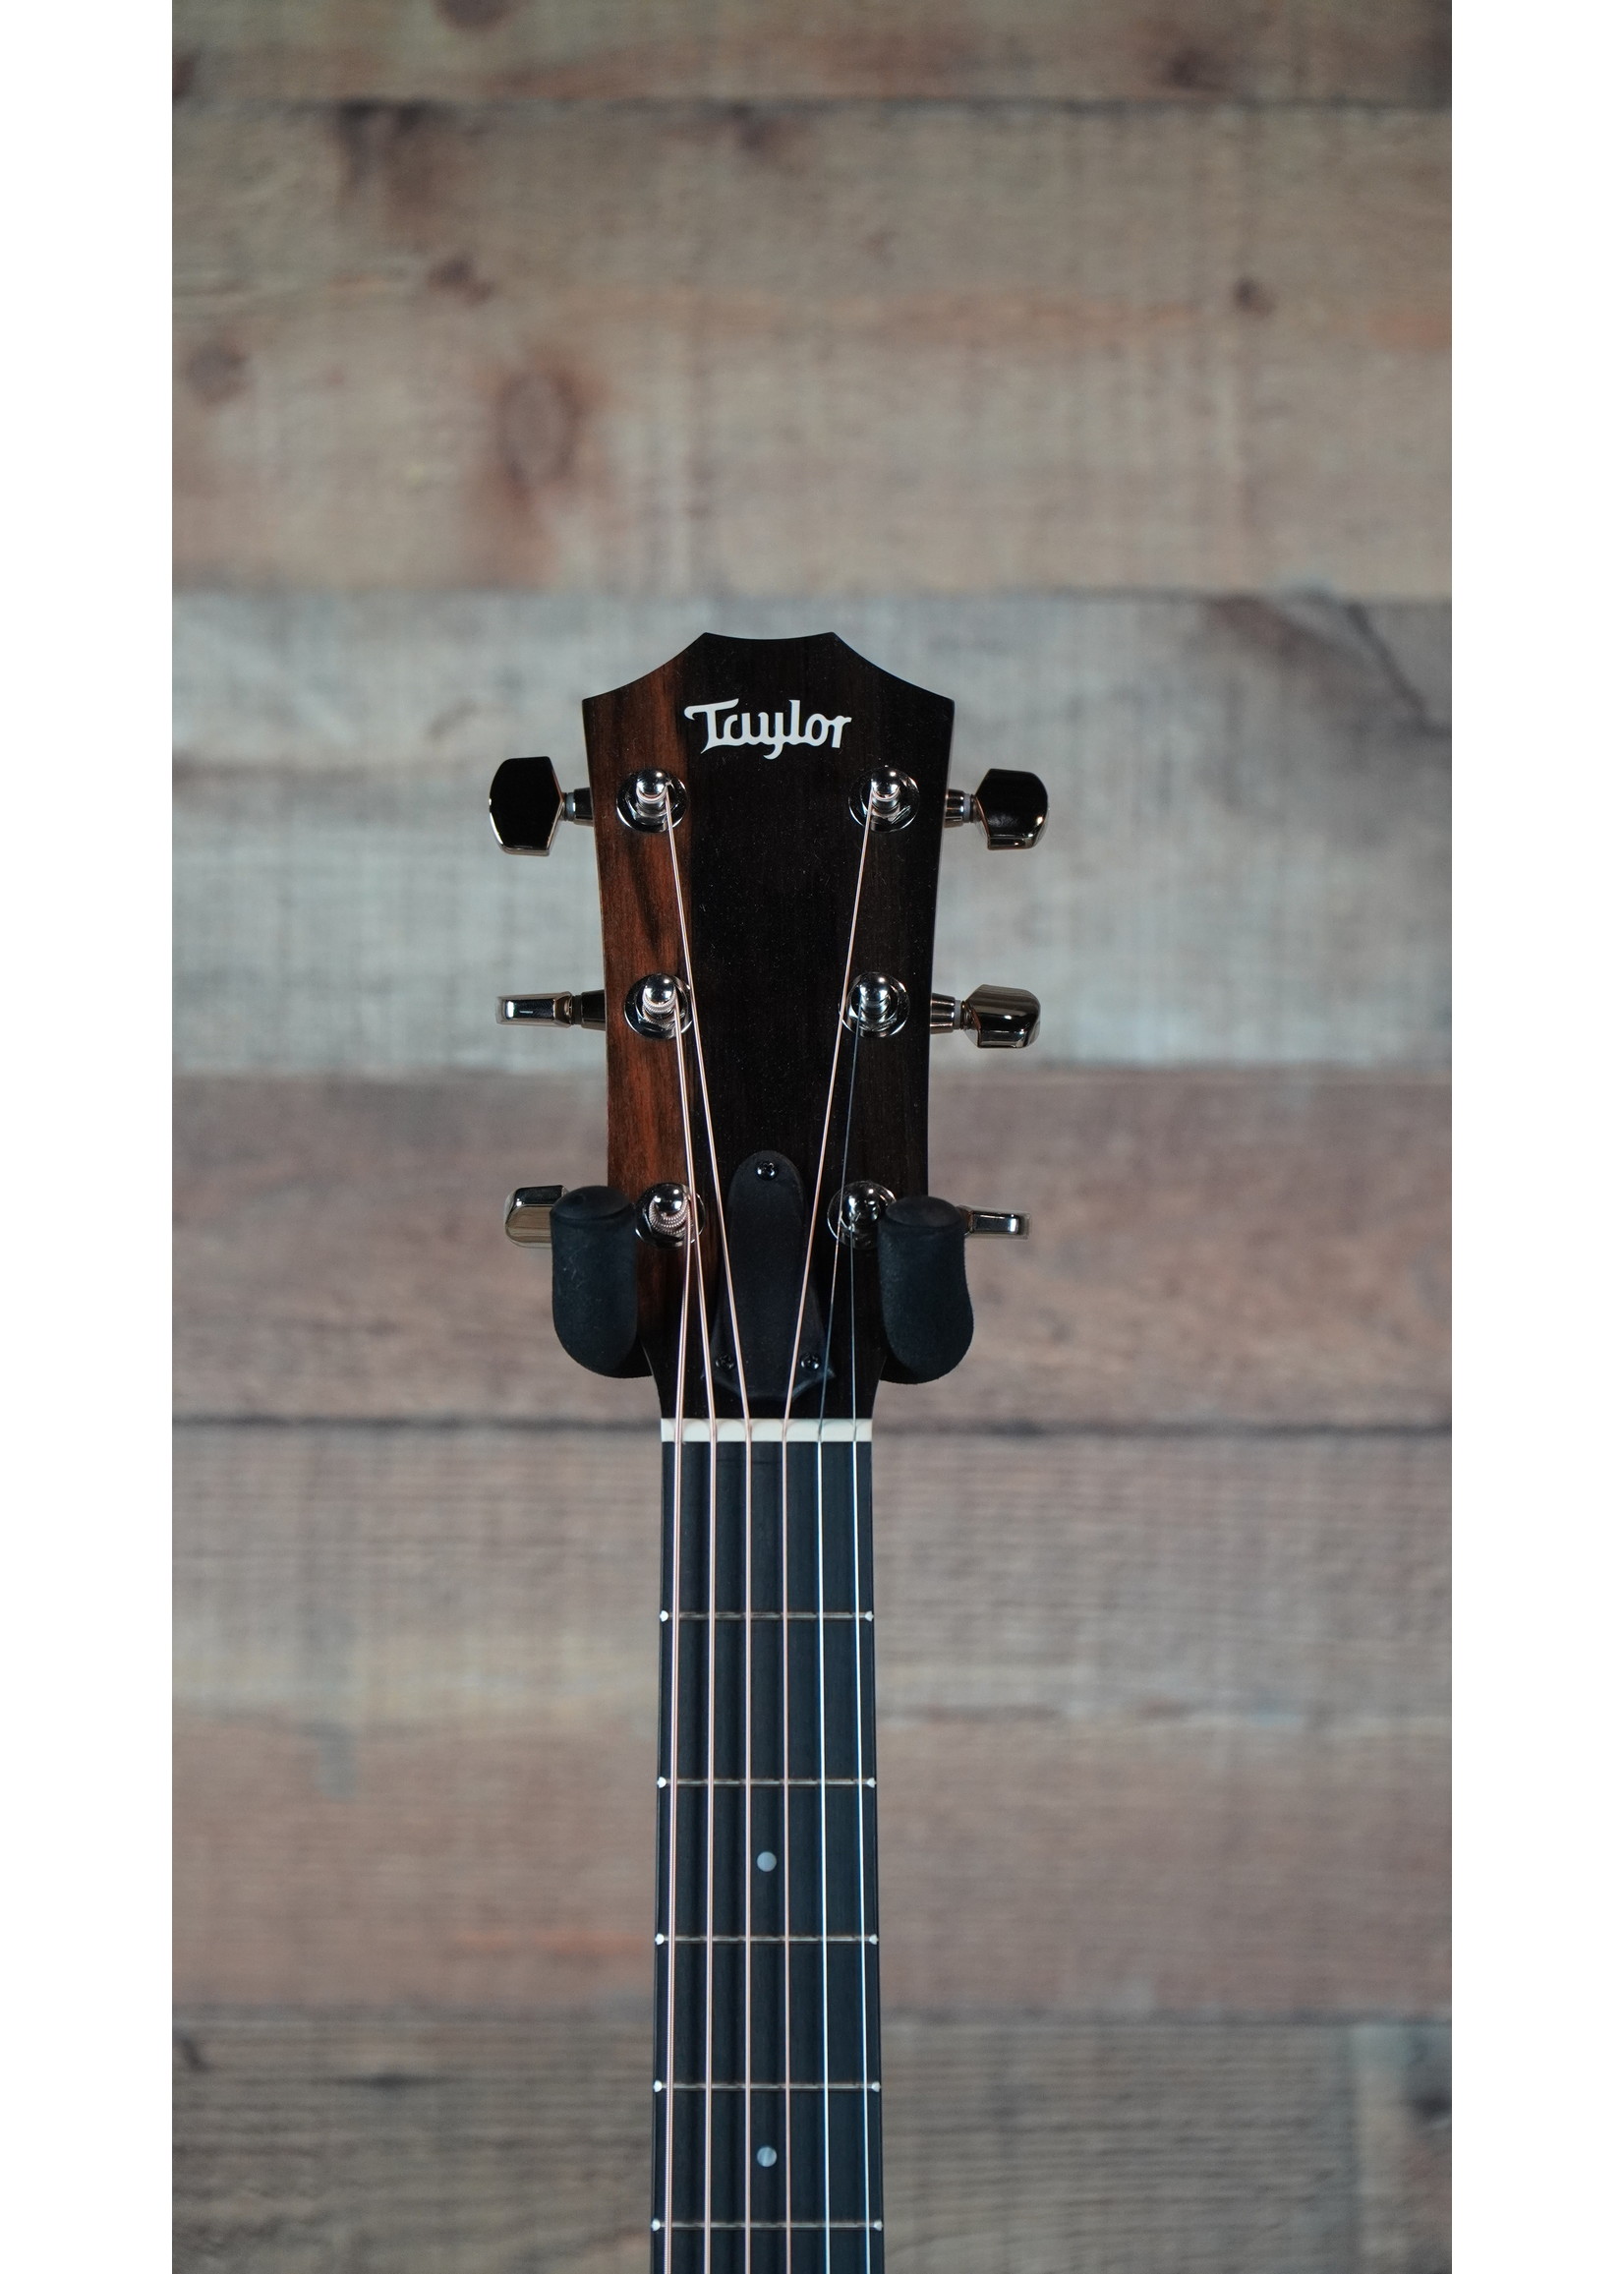 Taylor 210ce Plus 6-String | Sitka Spruce Top | Layered Rosewood Back and Sides | Tropical Mahogany Neck | West African Crelicam Ebony Fretboard | Expression System® 2 Electronics | Venetian Cutaway | Aerocase